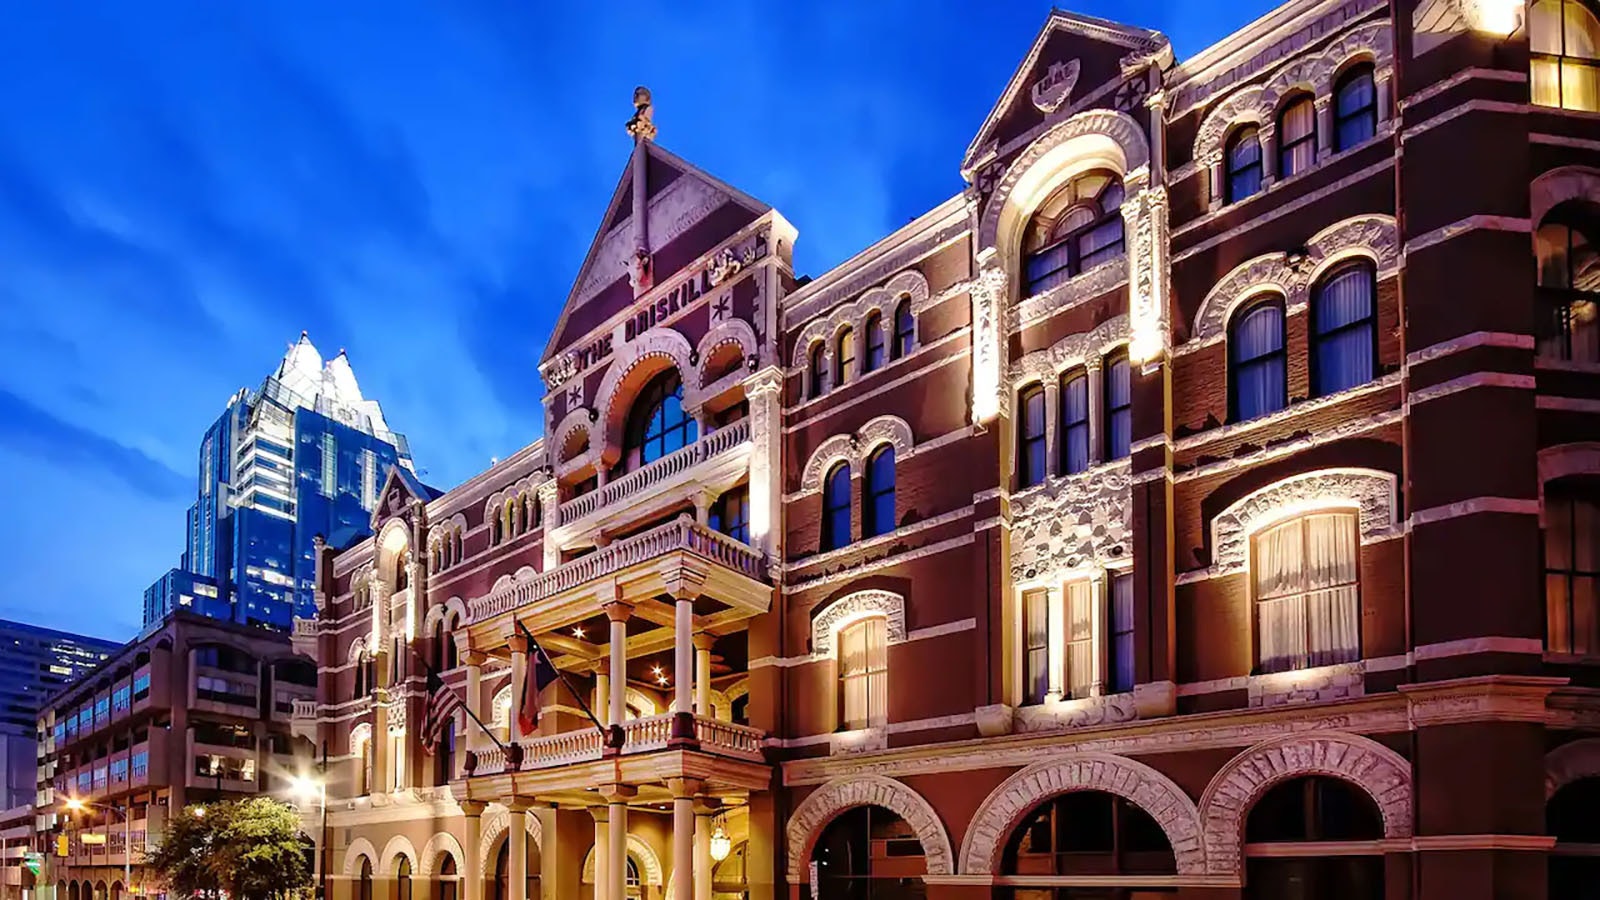 The facade of The Driskill at sunset.